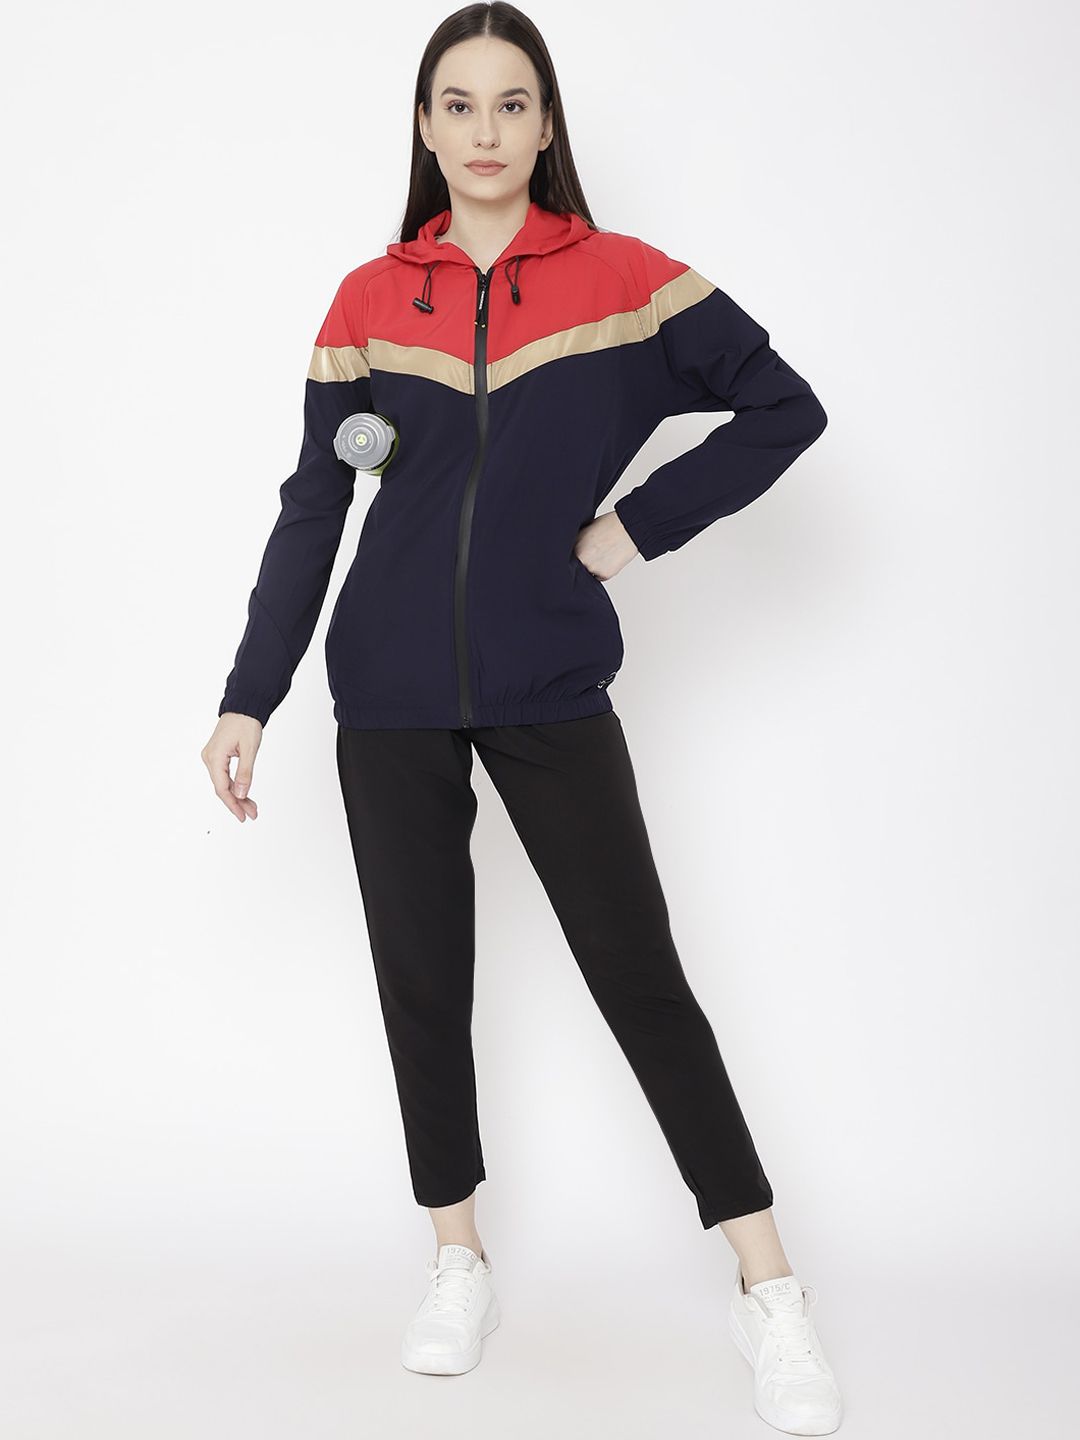 Chkokko Women Navy Blue & Red Solid Hooded Running Tracksuit Price in India